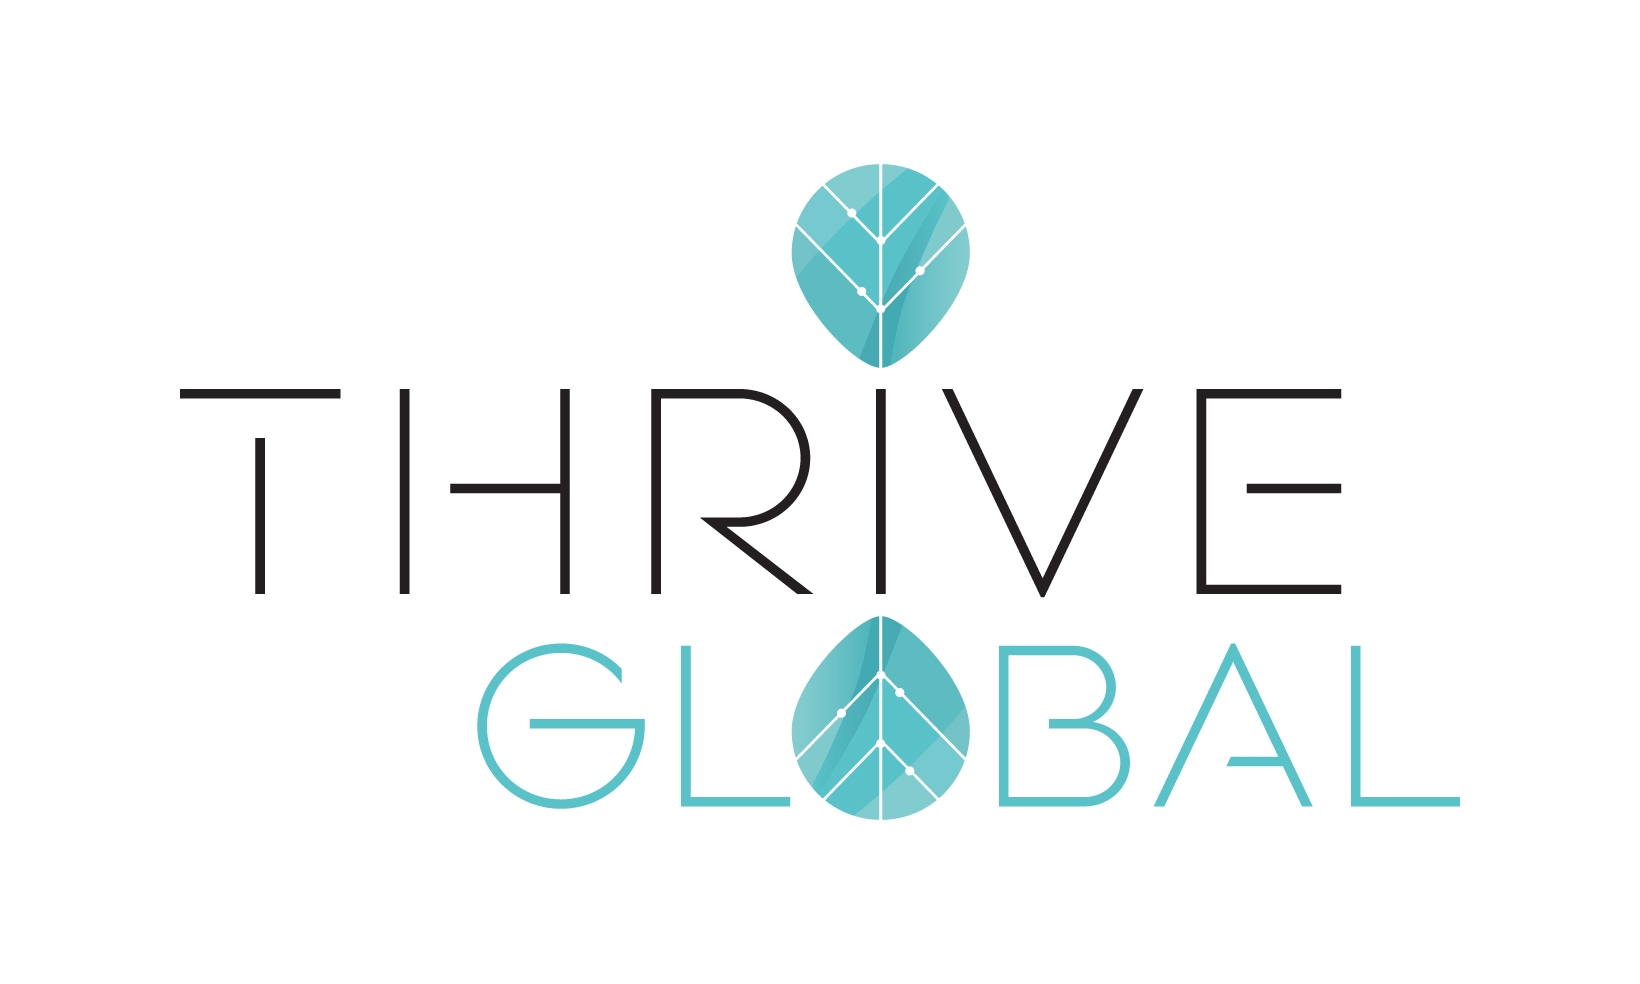 An interview about Greece / Thrive Global USA